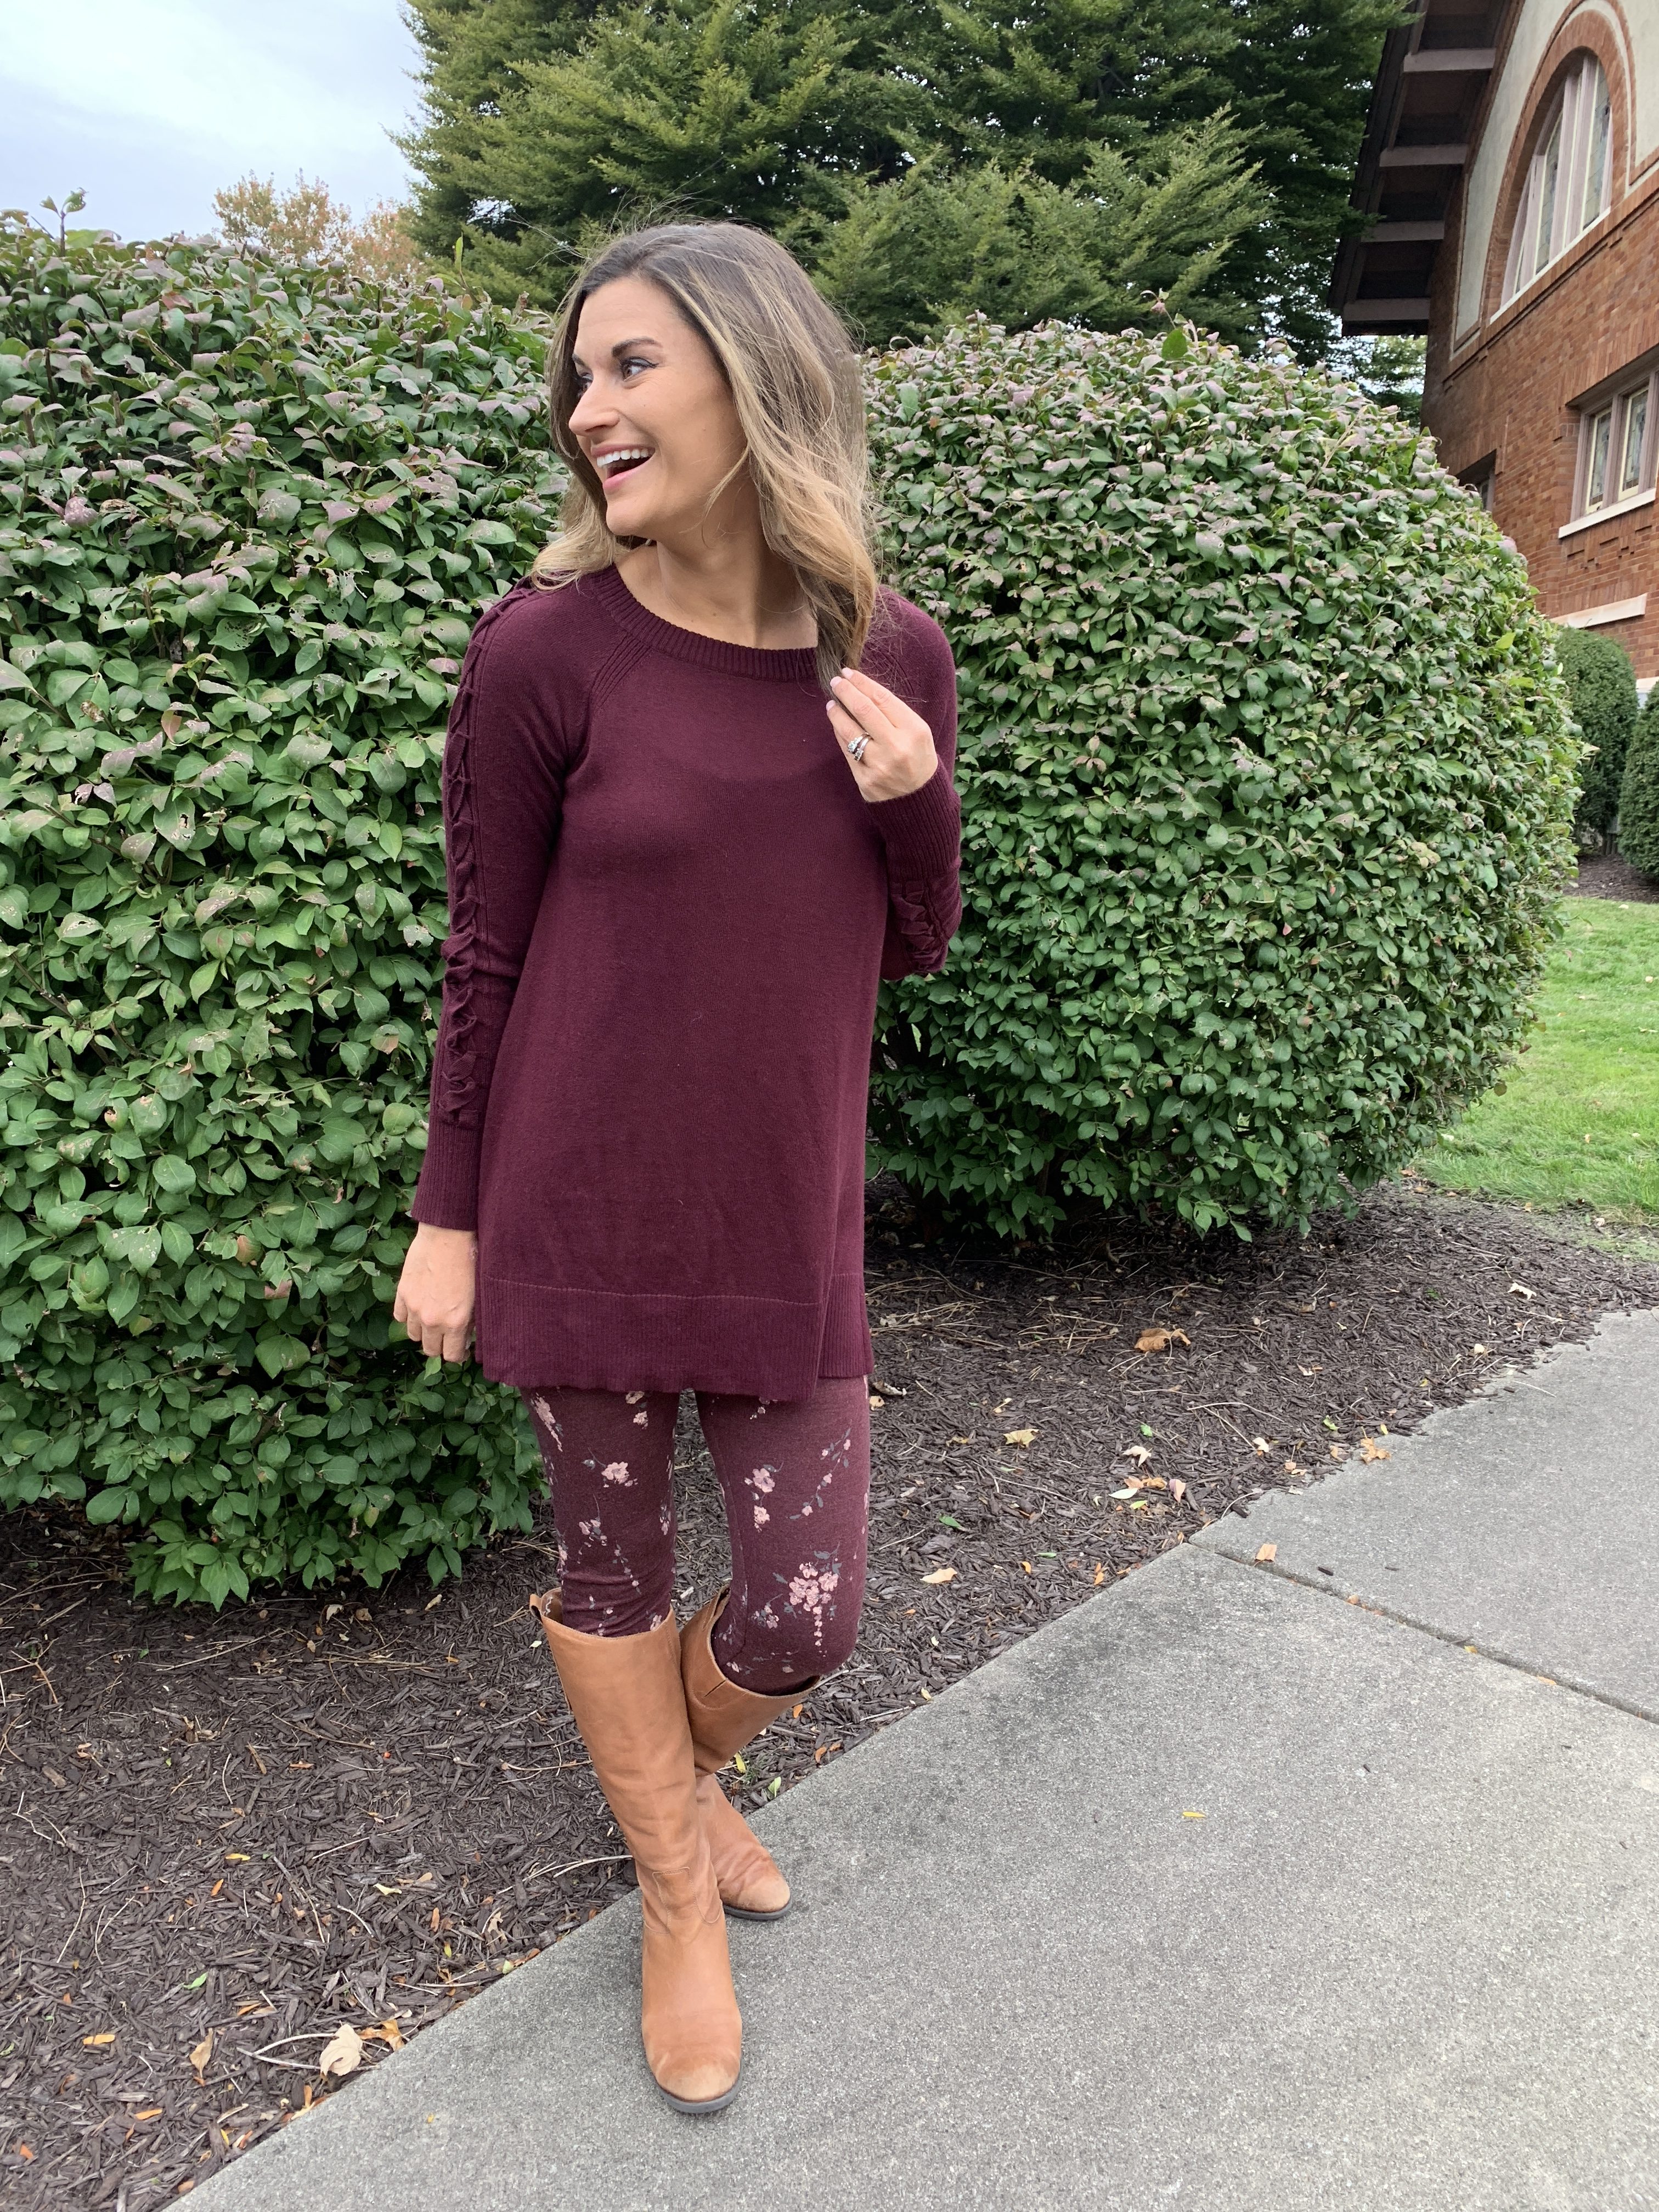 Ten tops from @kohls that are perfect with leggings! #ad #kohlsfinds #kohls  #justpostedblog